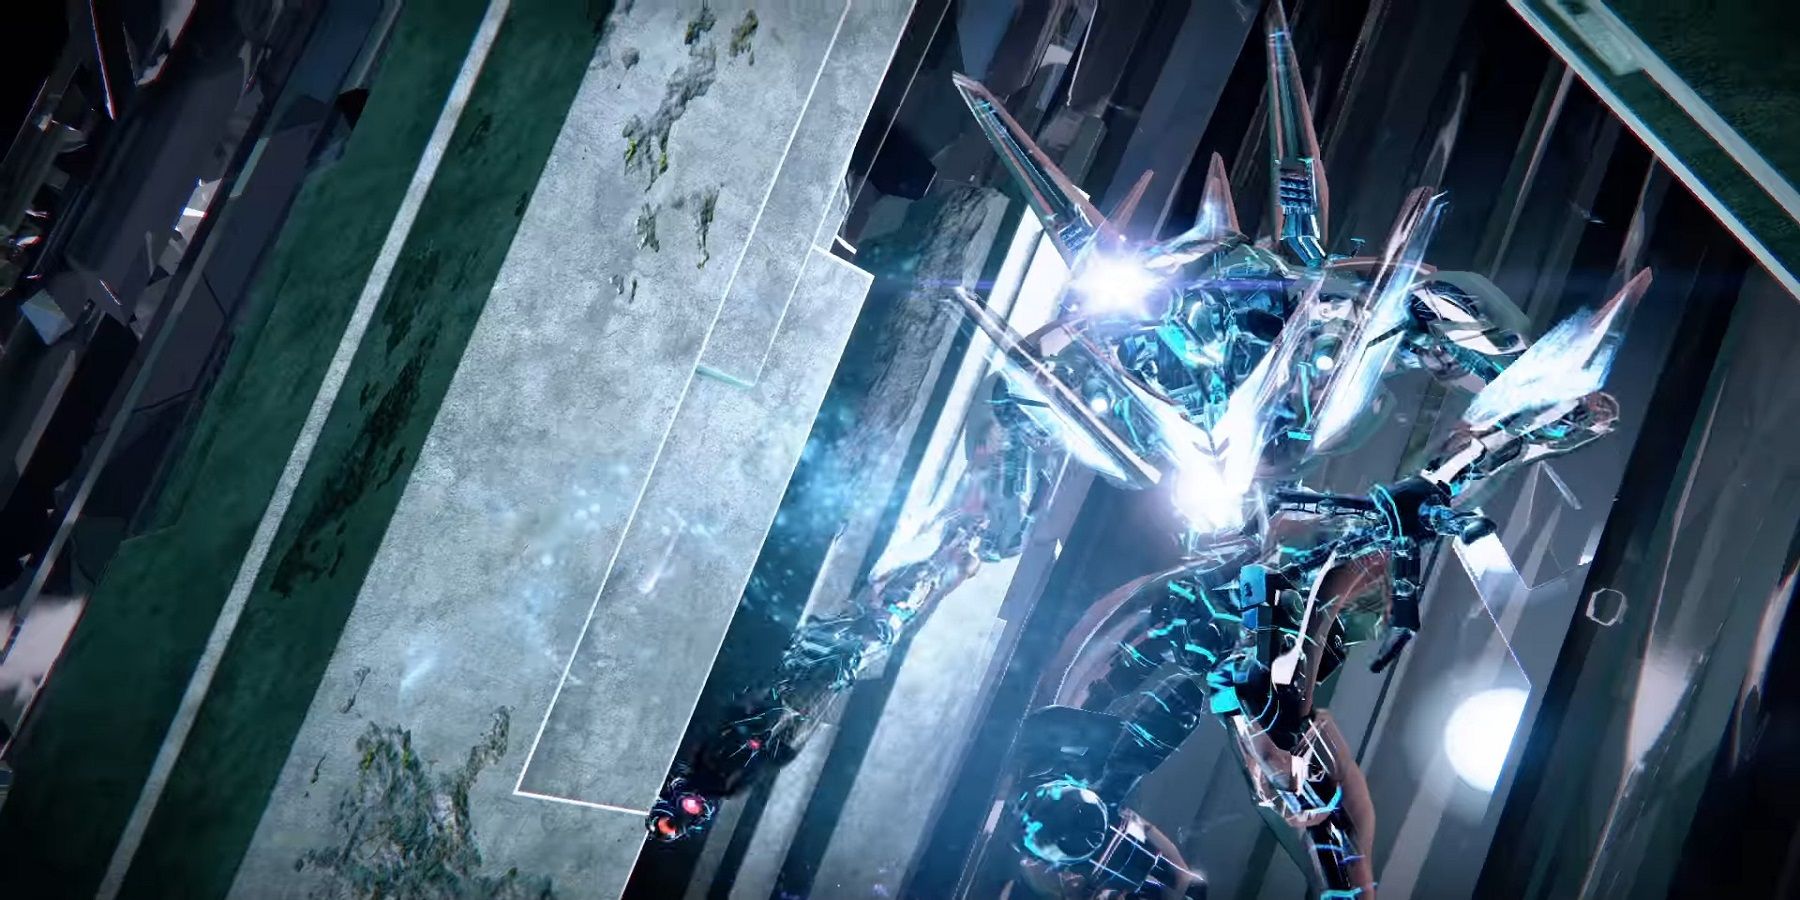 One Destiny 2 player beat Atheon solo in two melee hits.